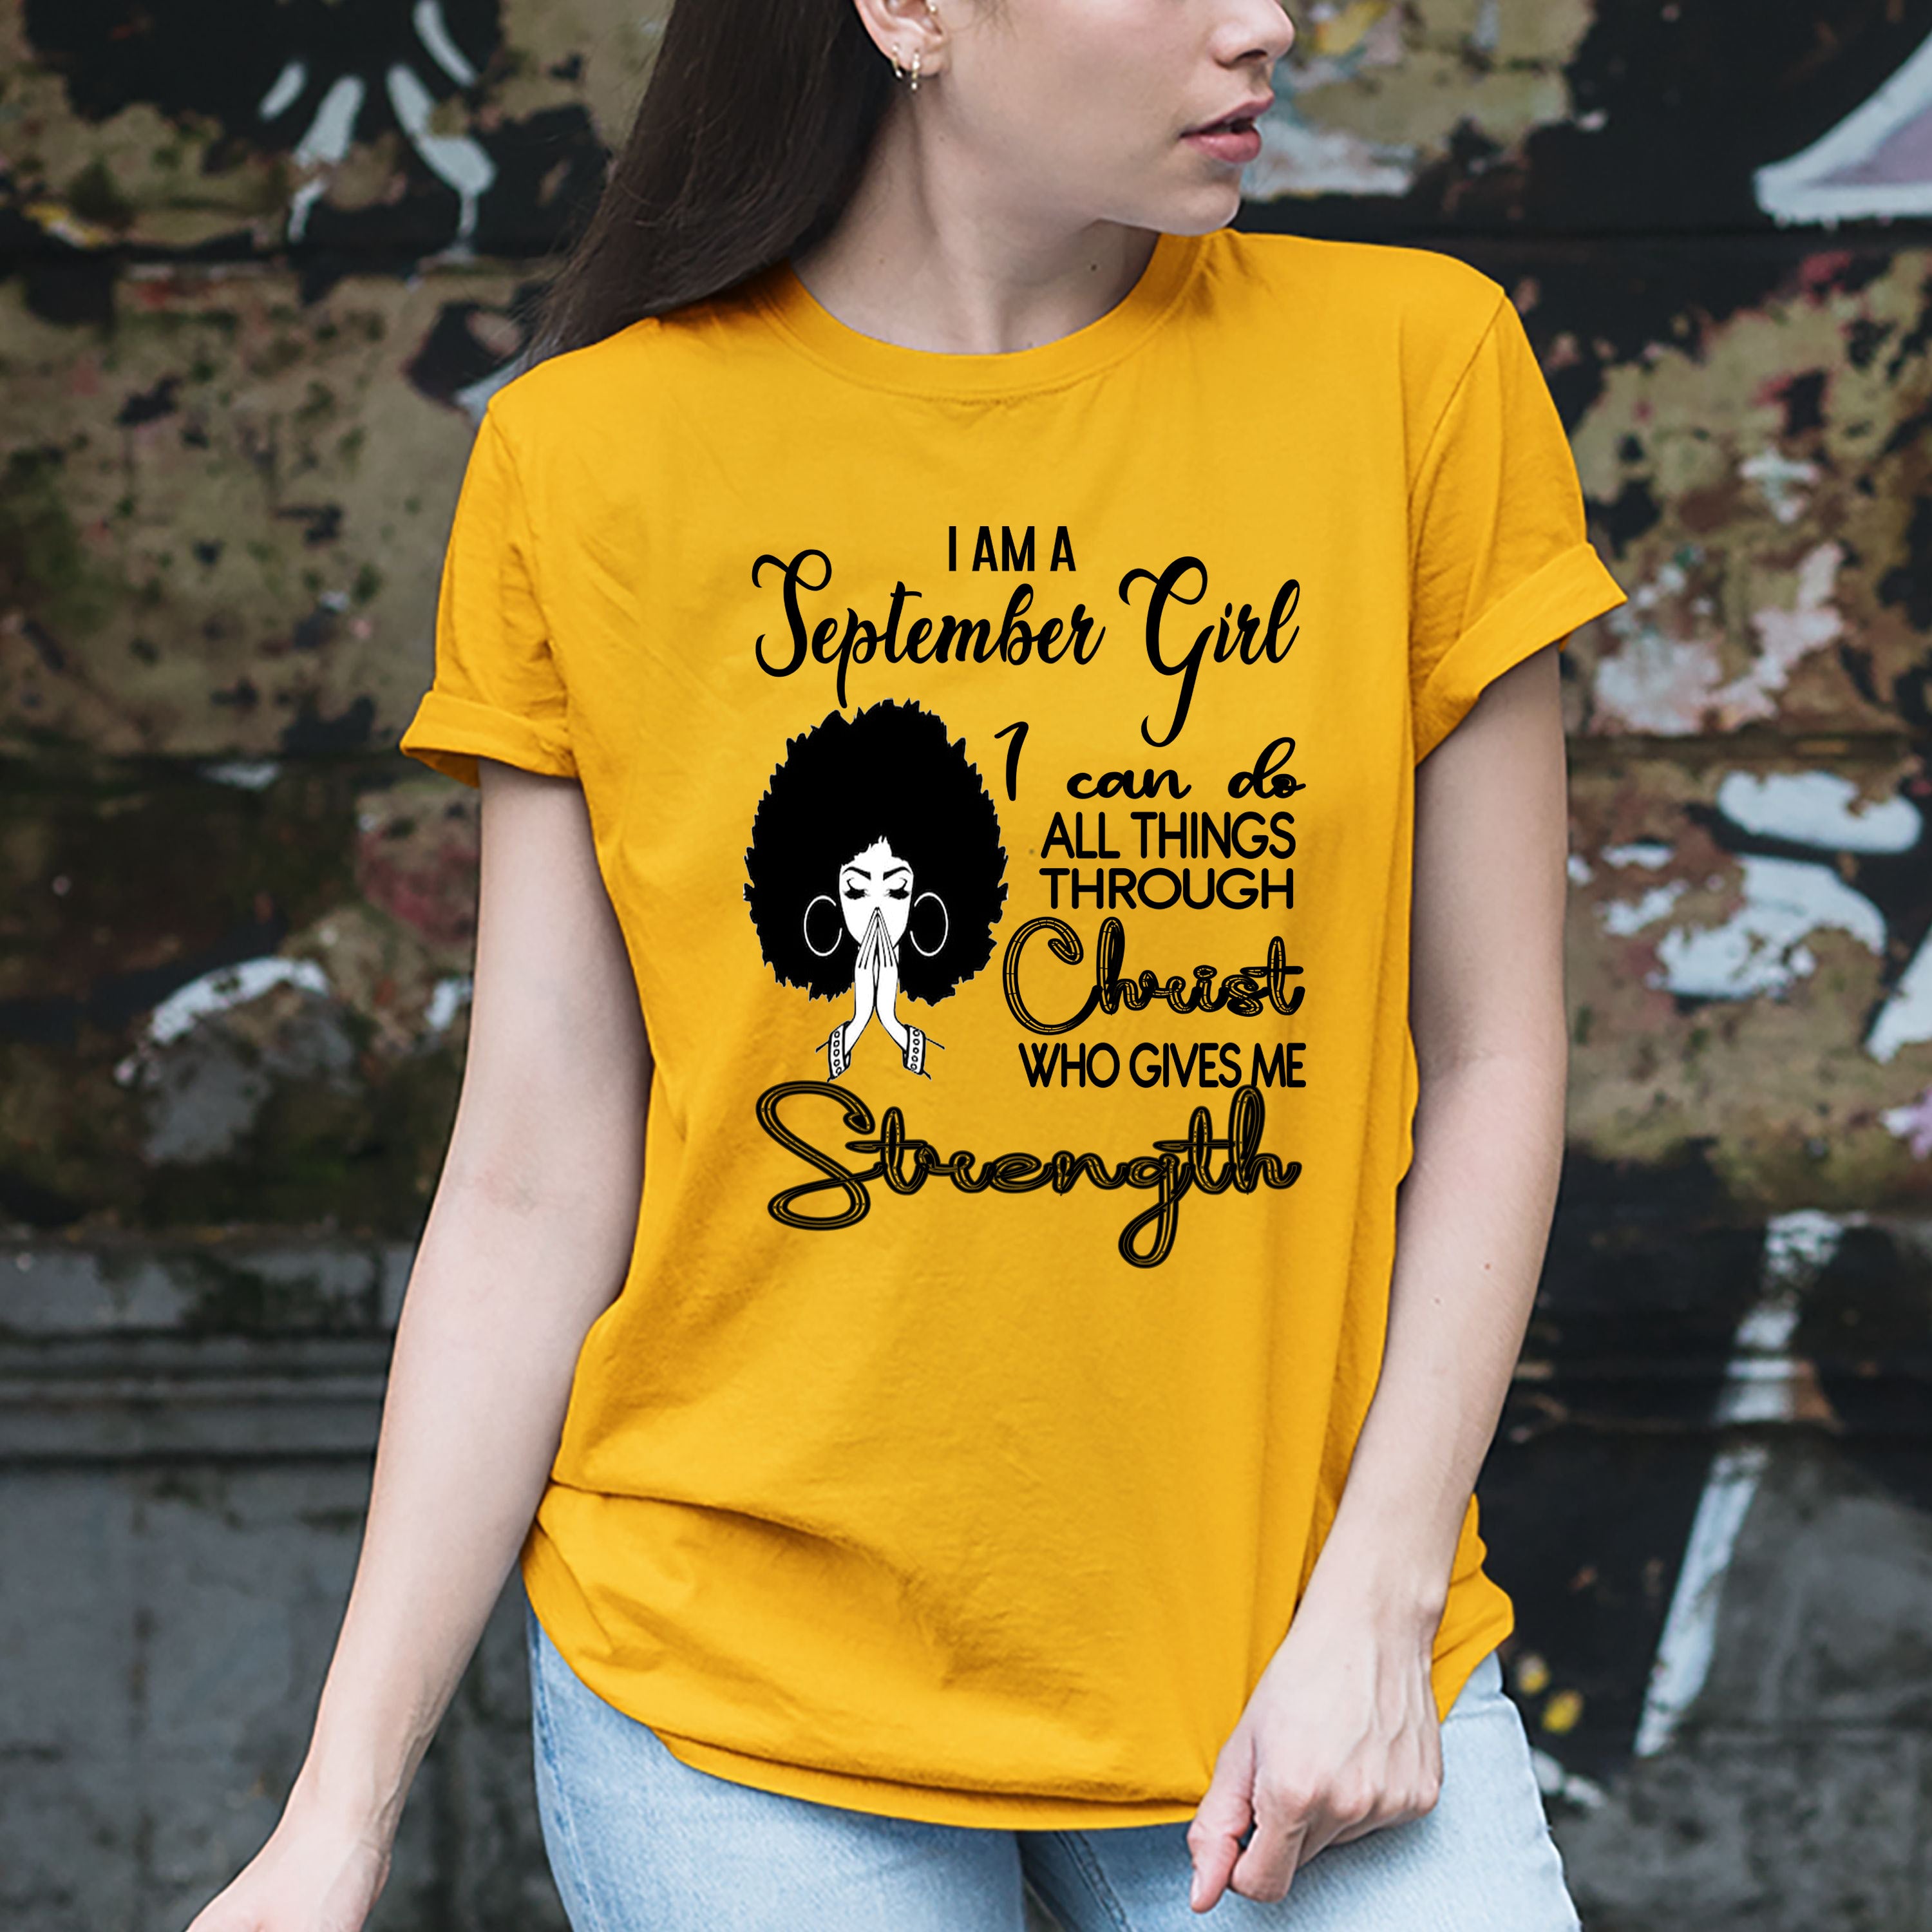 "SEPTEMBER GIRL Can Do All Things Through Christ Who Gives Me Strength",T-Shirt.